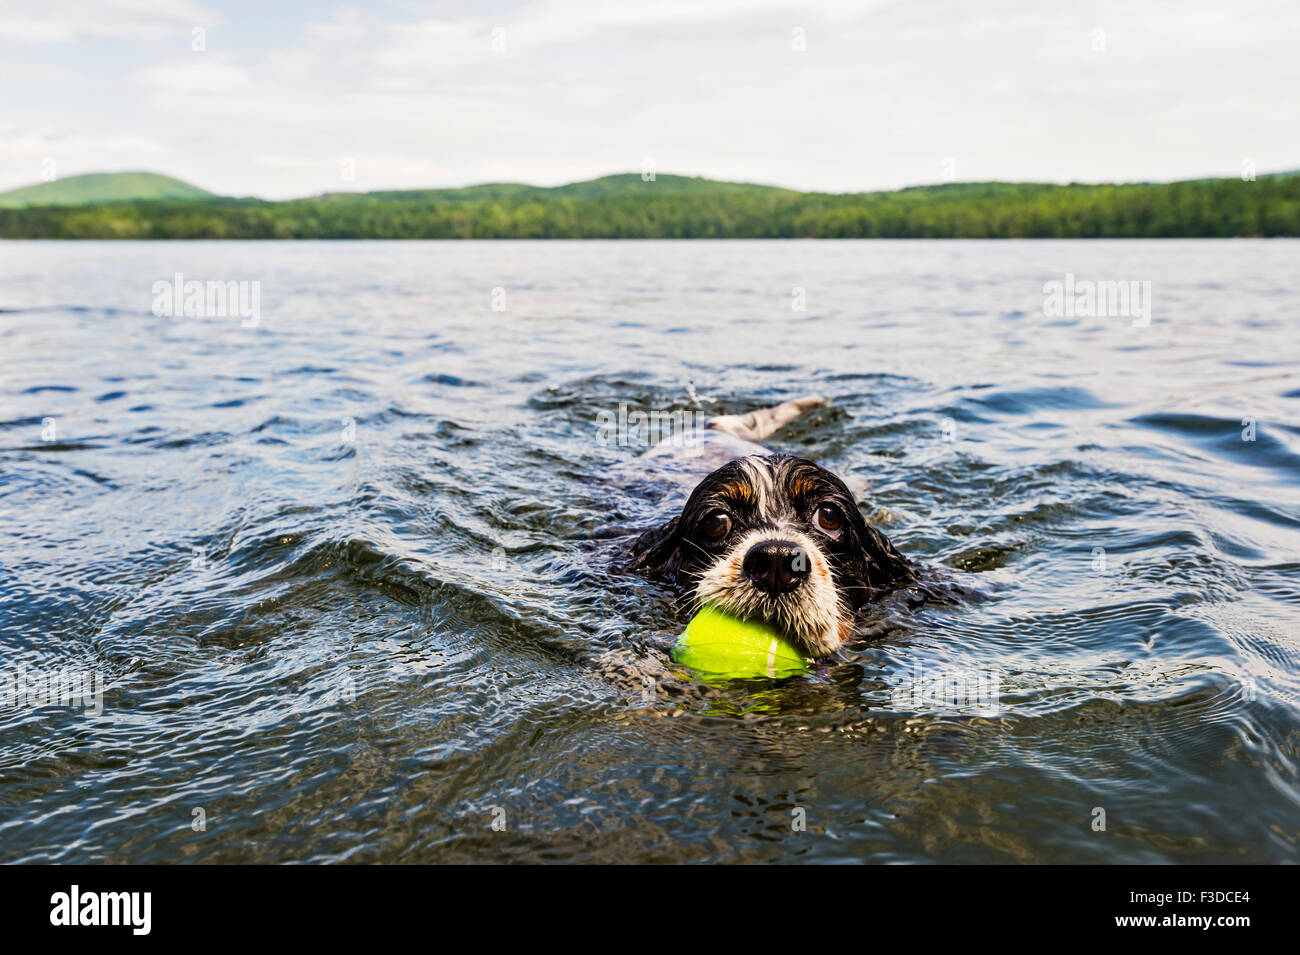 Dog swimming in lake holding ball in mouth Stock Photo